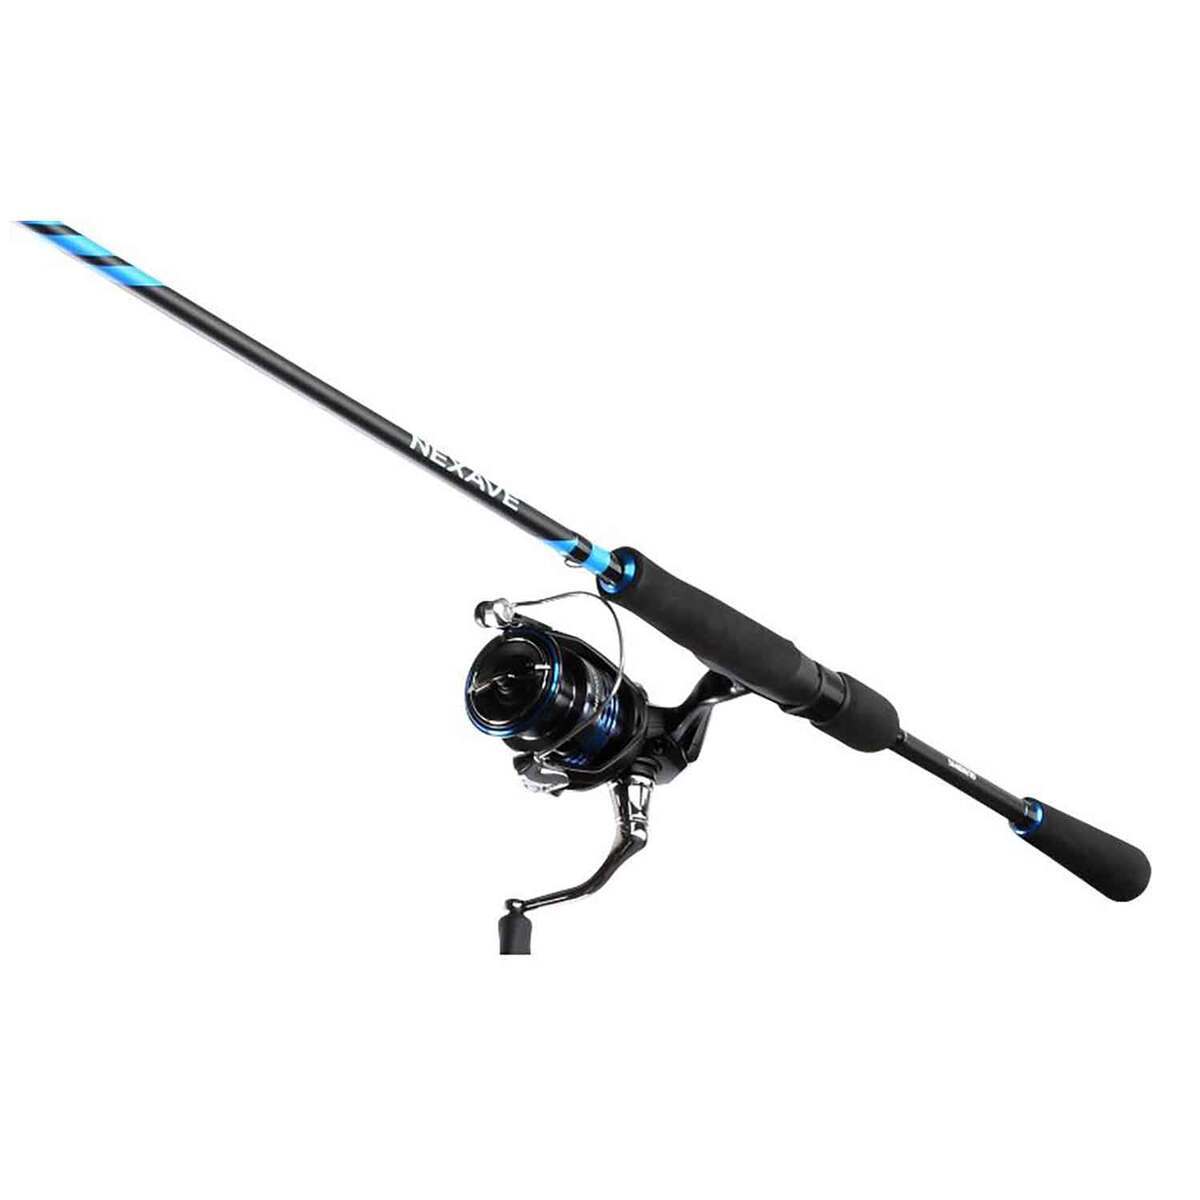 Shimano Nexave Spinning Rod and Reel Combo - 6ft 6in, Medium Light ...